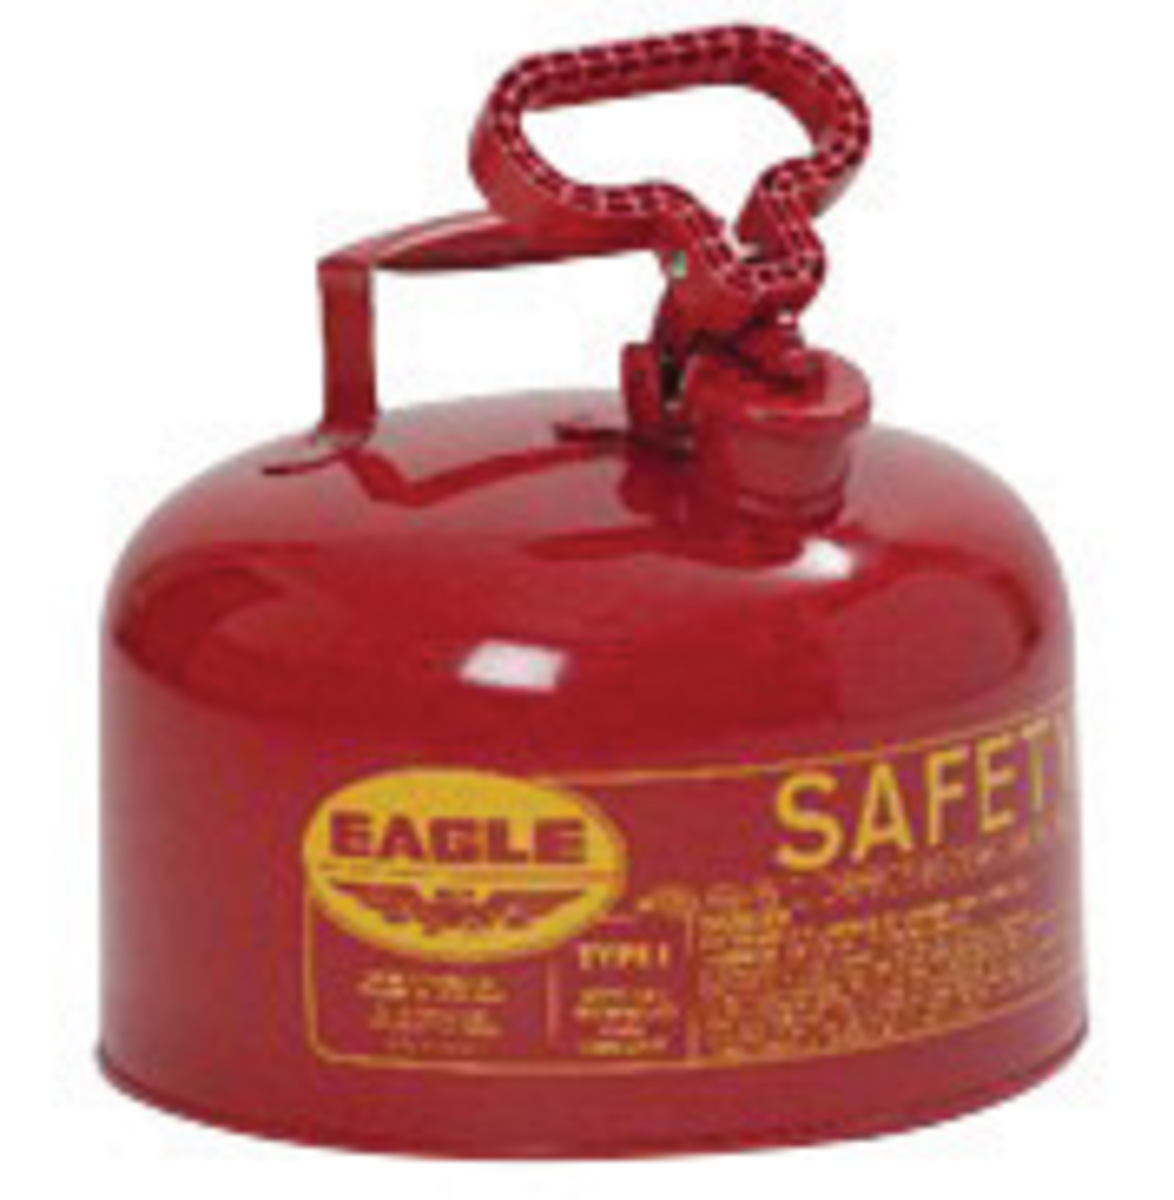 Eagle 2 Gallon Red 24 Gauge Galvanized Steel Type I Safety Can With Non-Sparking Flame Arrestor Without Funnel